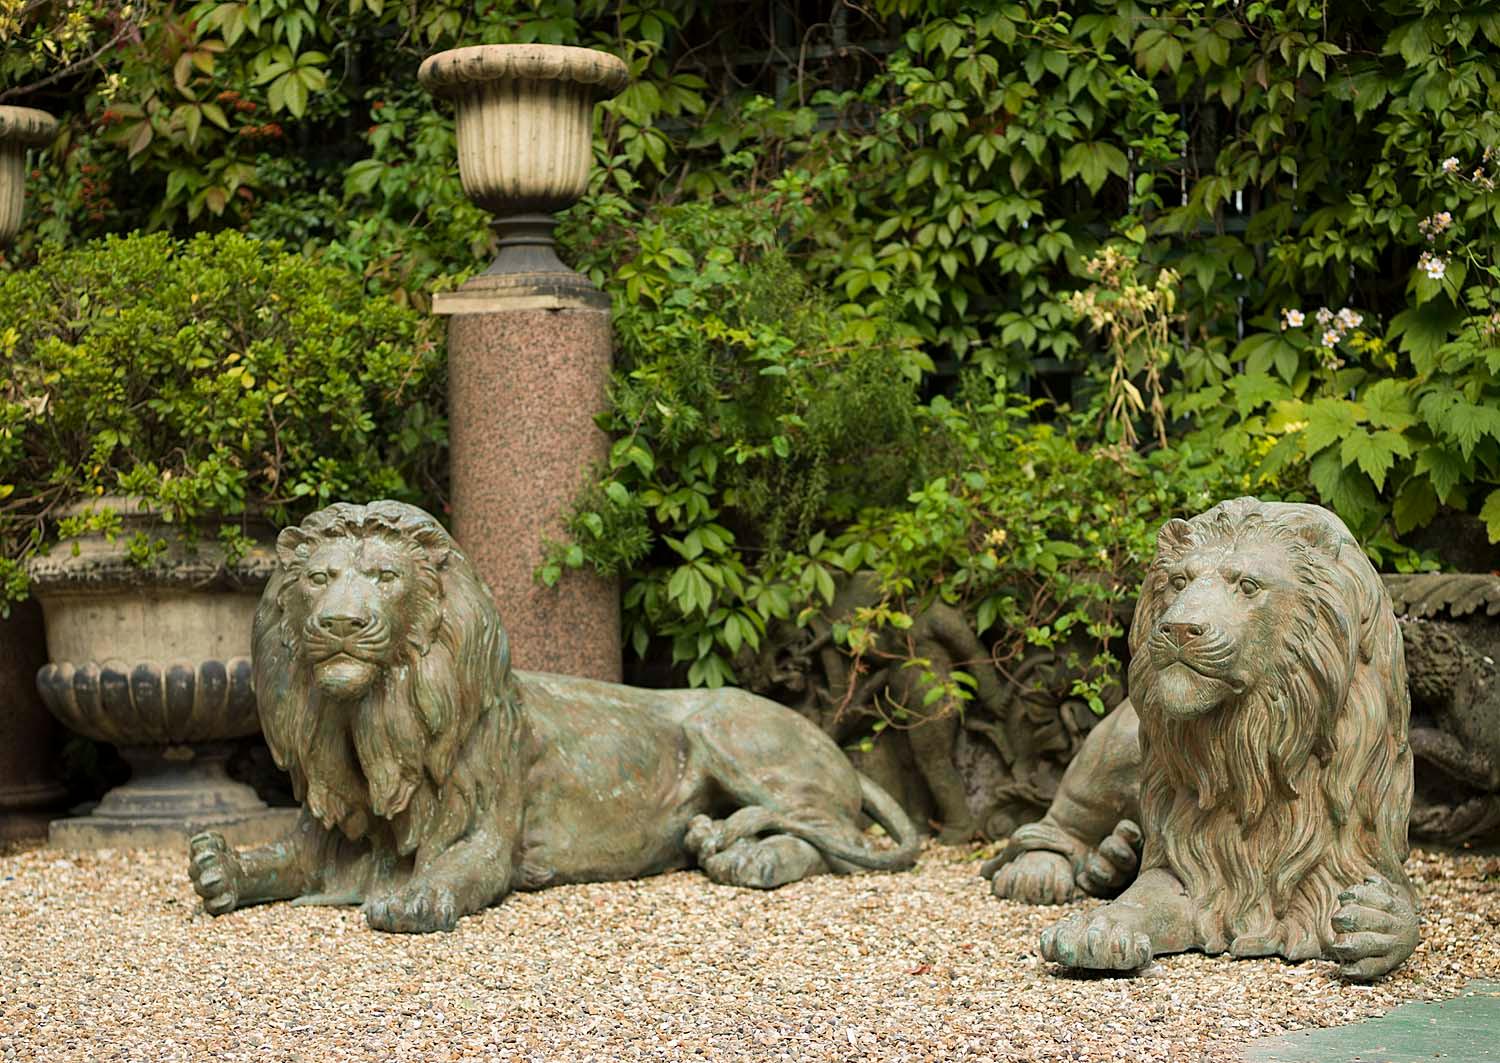 A pair of large and regal 20th century patinated bronze lions couchant. They could be displayed indoors, although their sheer size would dominate most rooms, rather much more suited to the outdoors in say a garden or a park.
Mid to late 20th